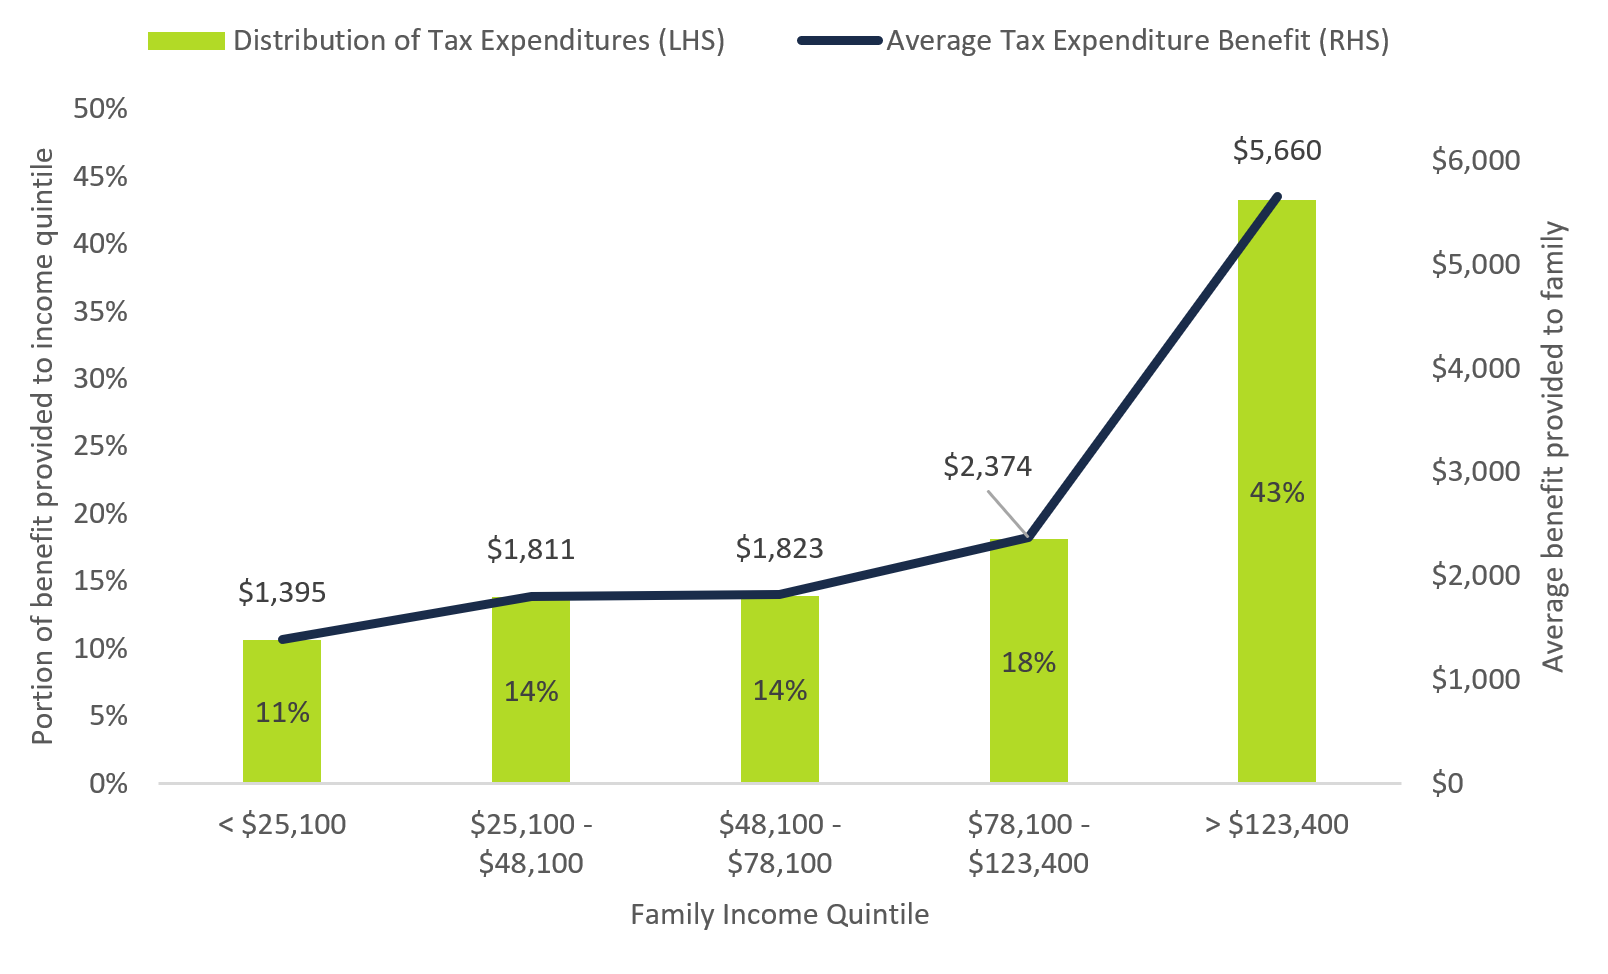 Figure 5 1: PIT tax expenditure benefits are concentrated at the top of the family income distribution